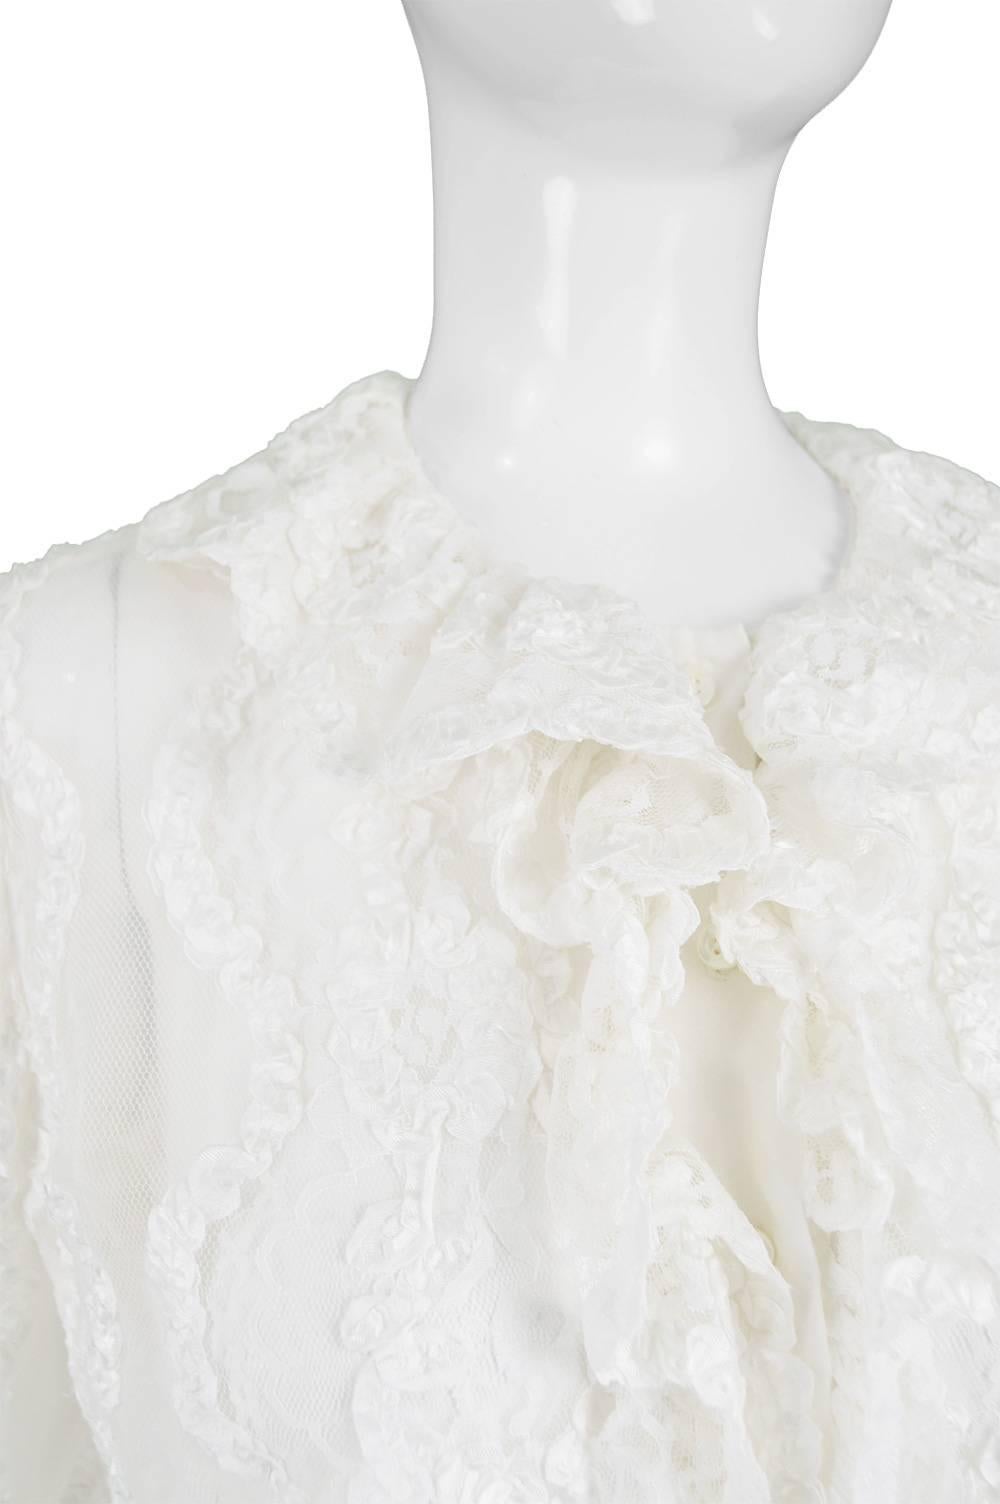 Hardy Amies Couture Vintage White Chantilly Lace Ribbonwork Ruffle Shirt, 1970s For Sale 1